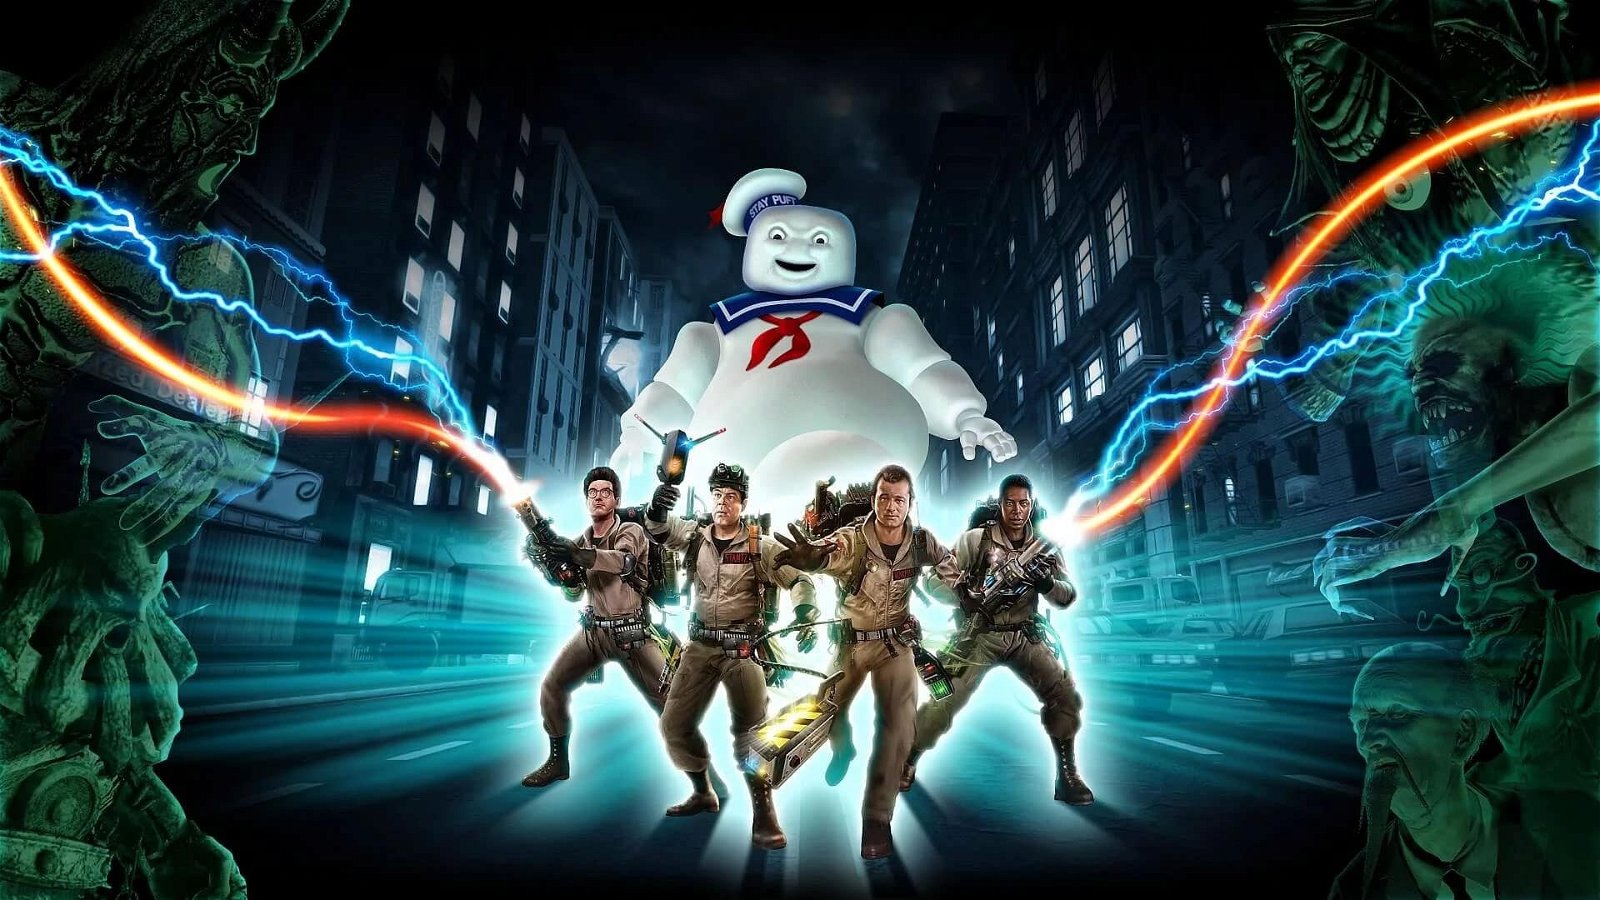 Returning to the Ghostbusters Firehouse 3